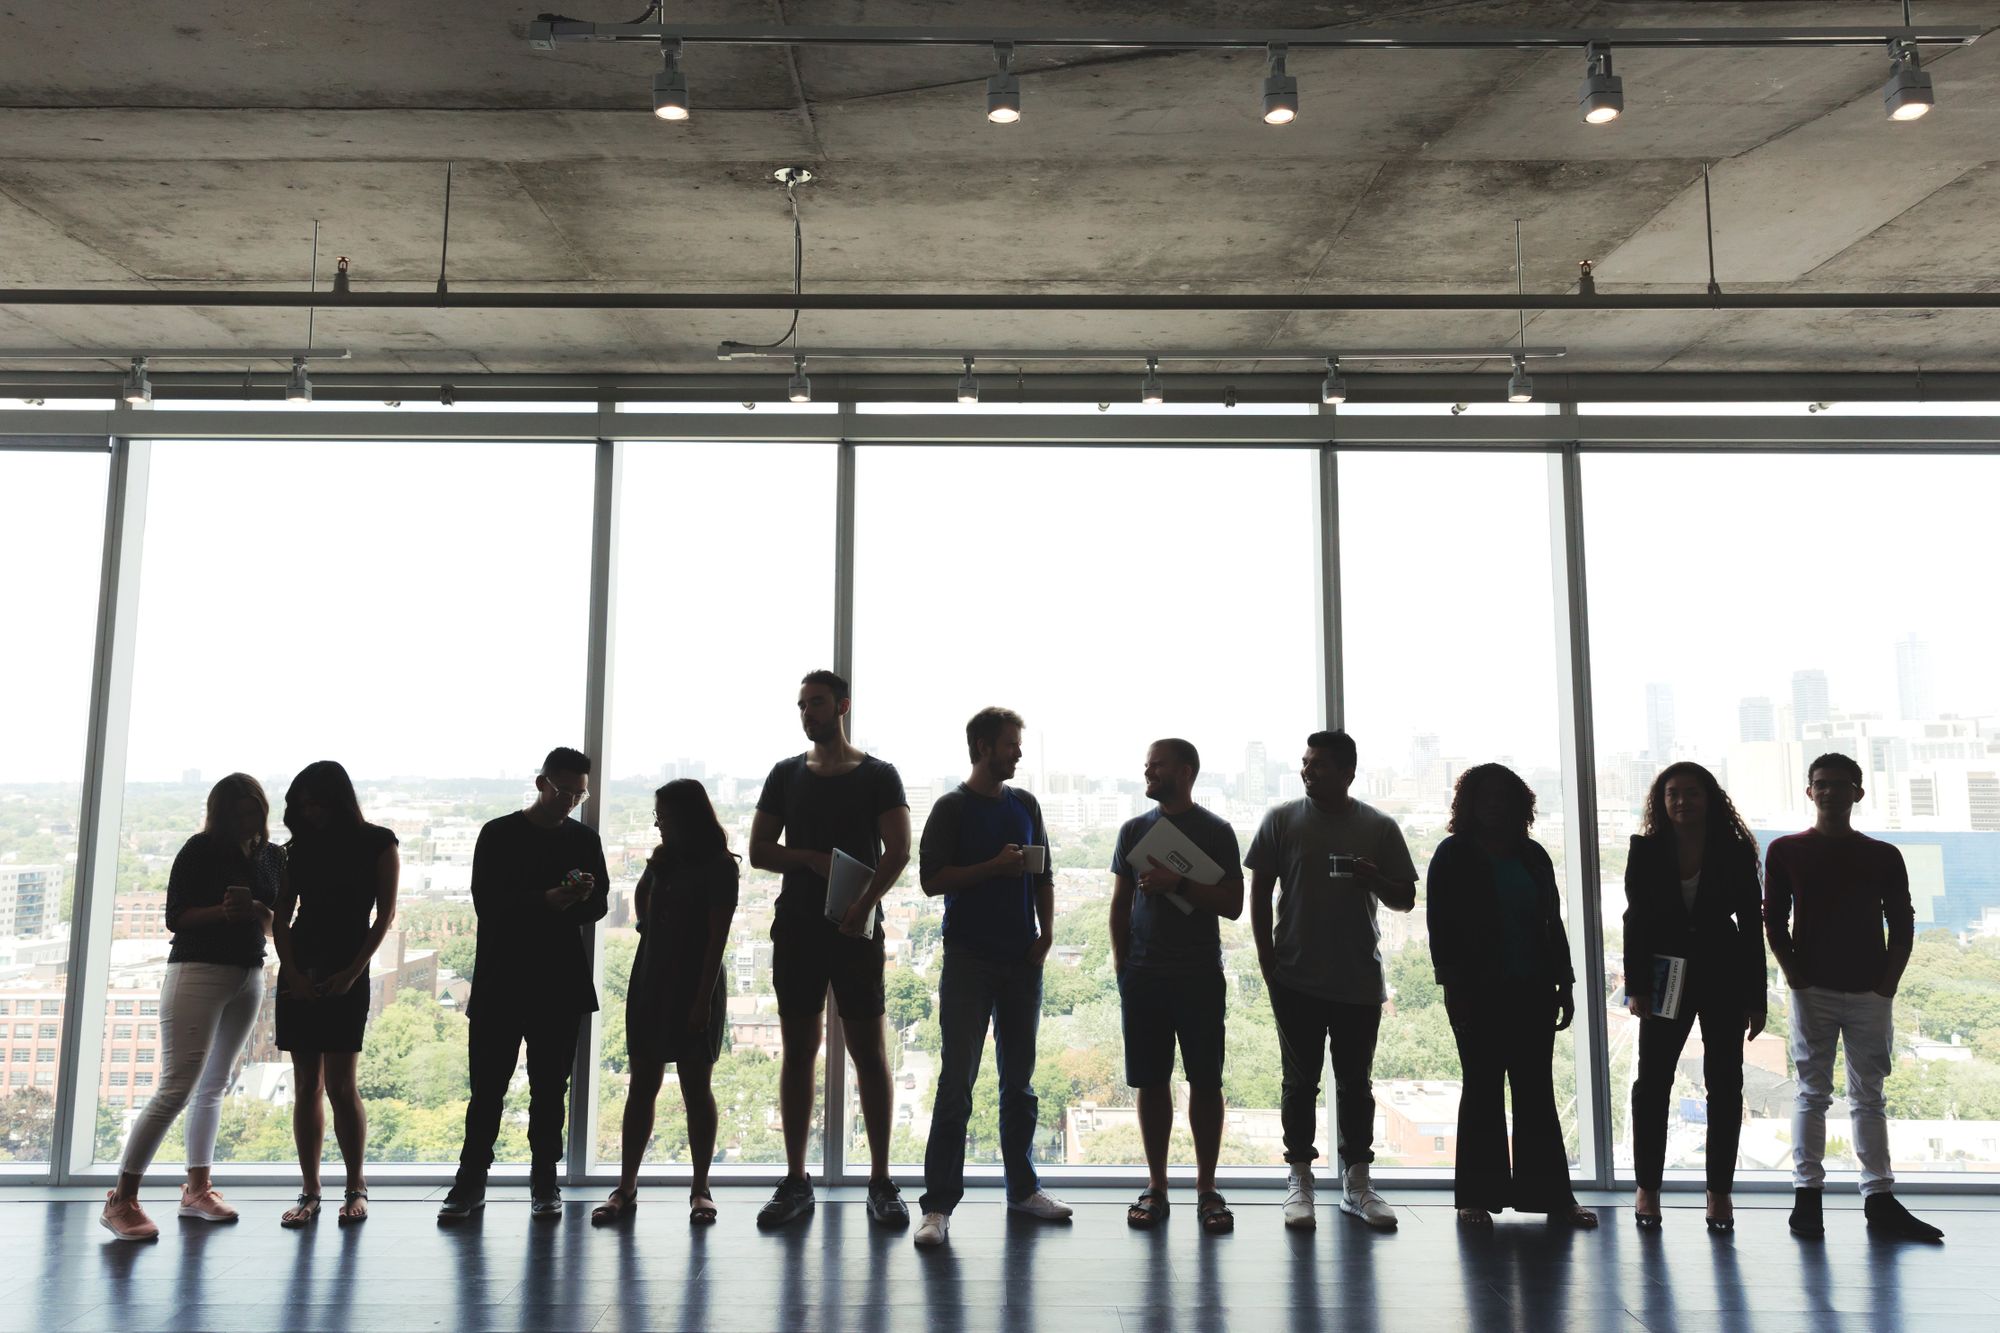 Eleven people standing in front of large backlit glass windows